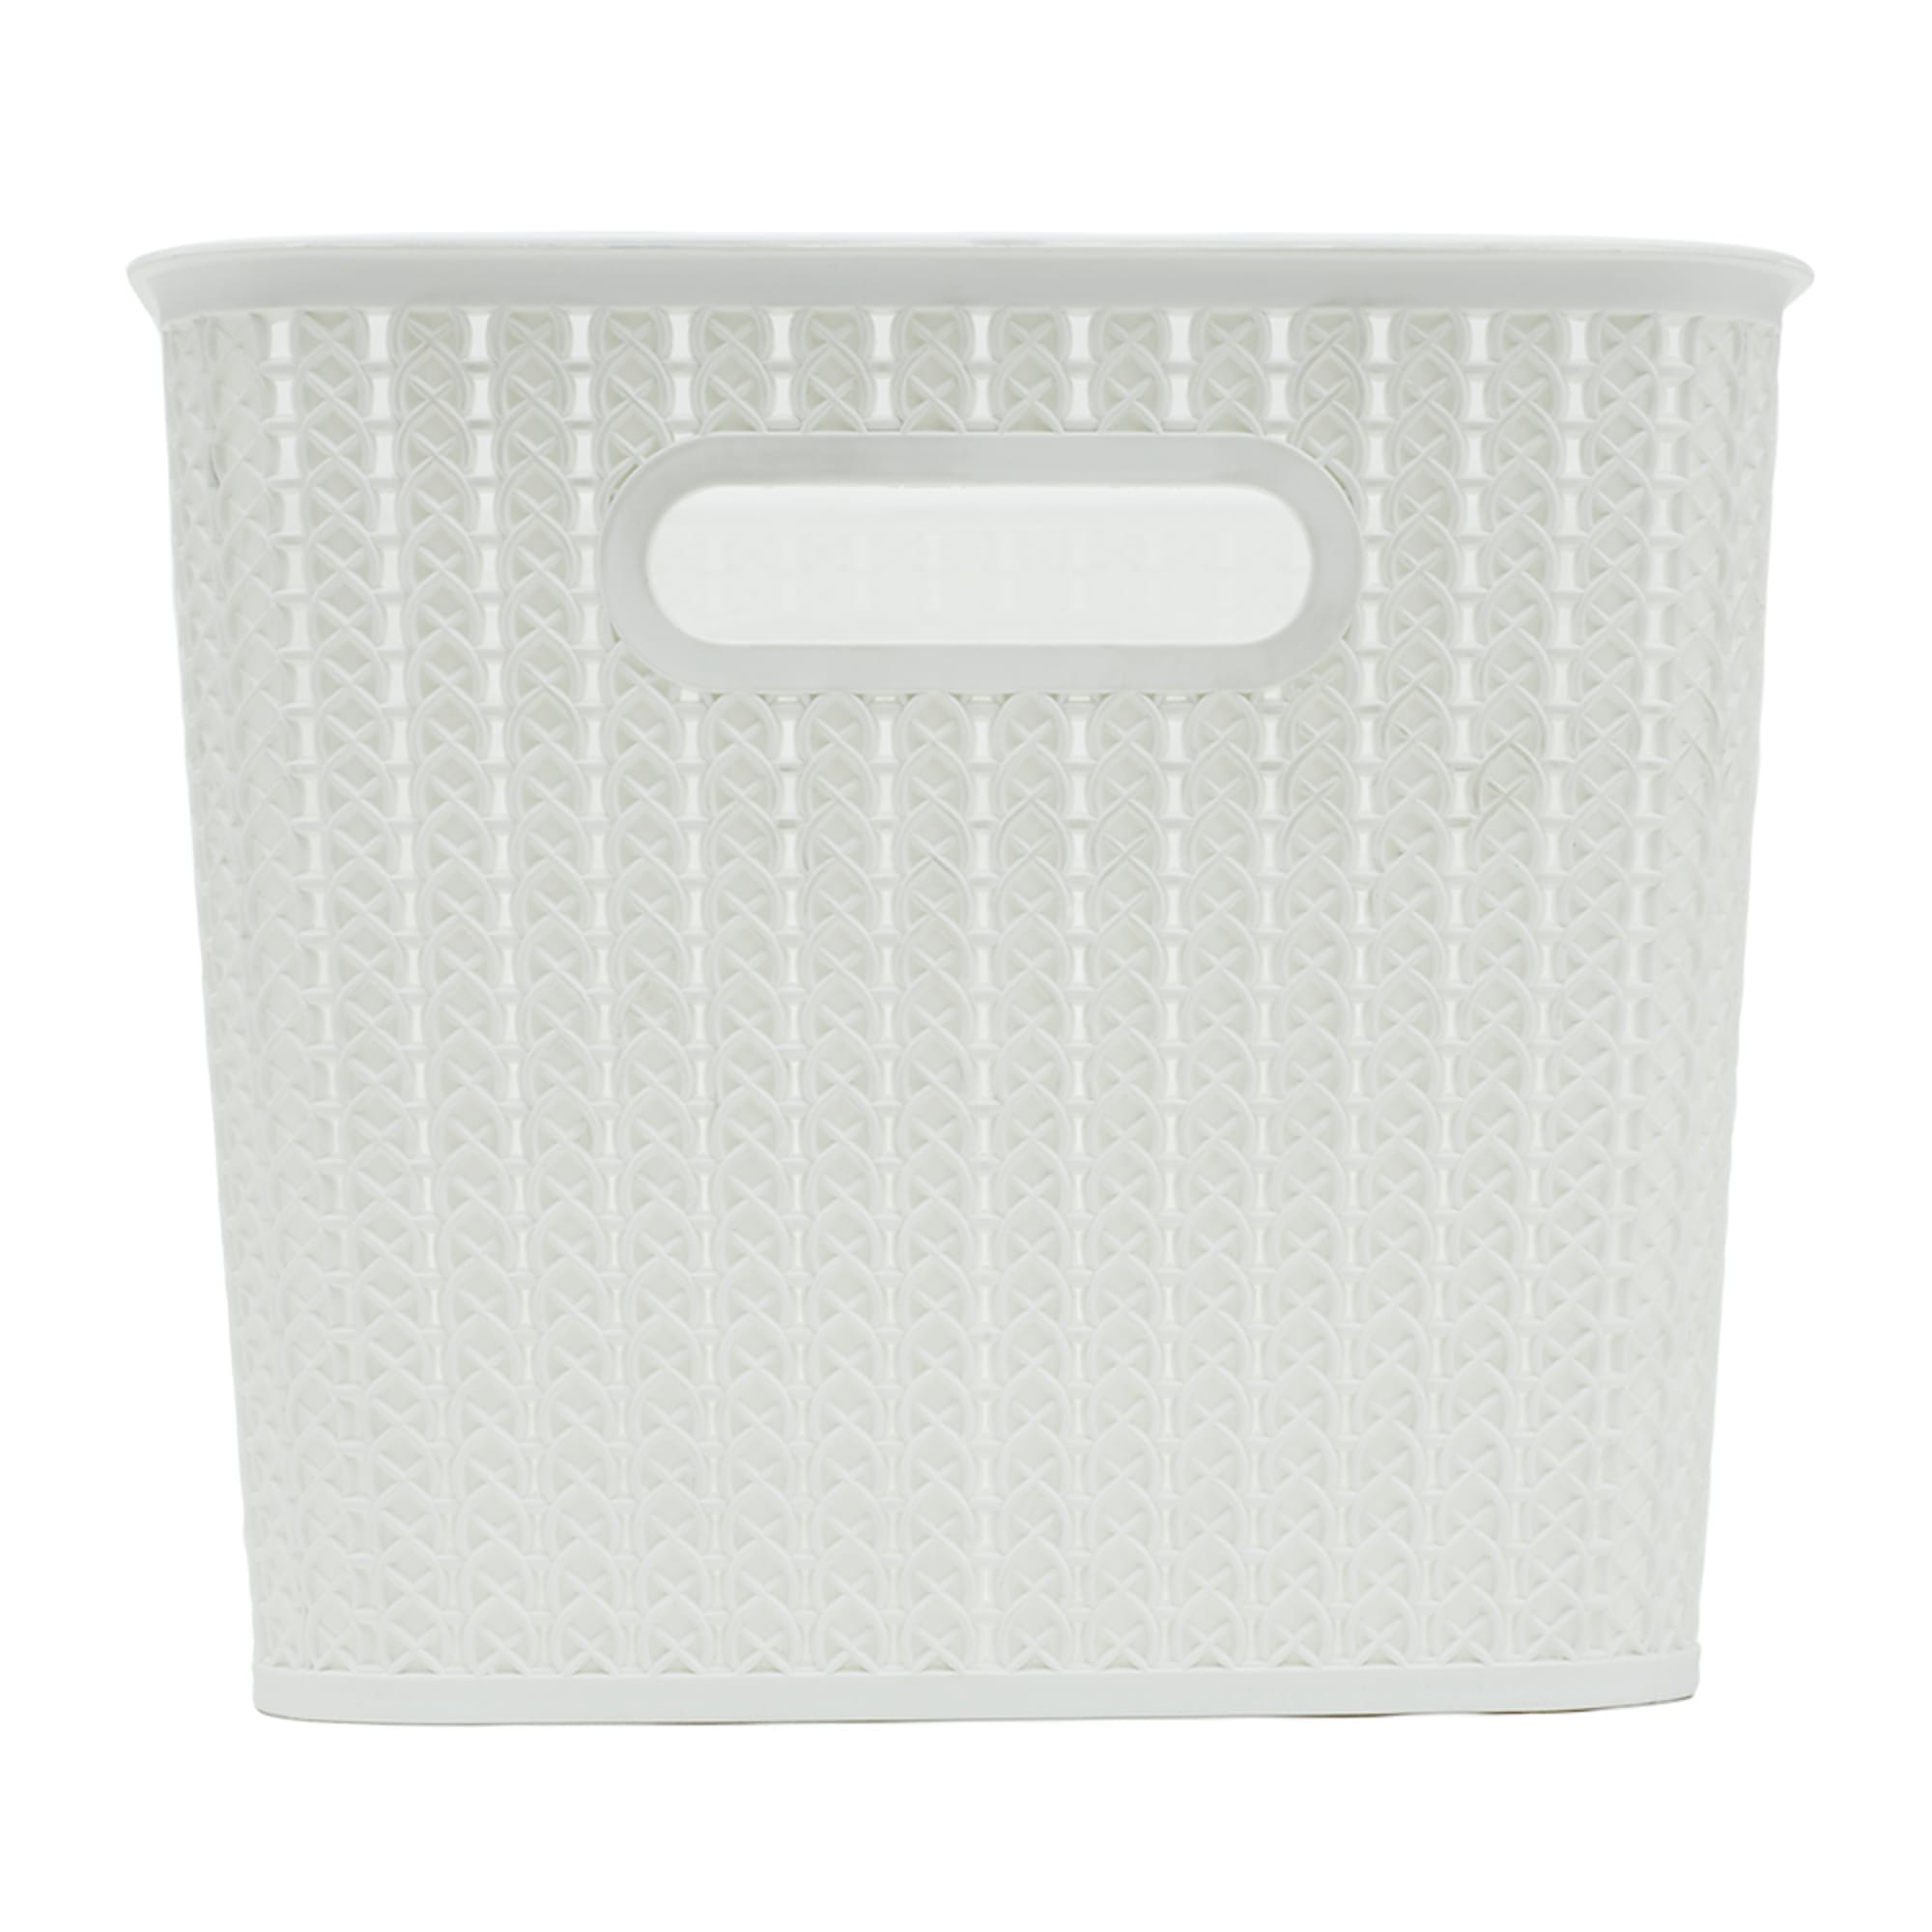 Home Basics 20 Liter Plastic Basket with Handles, White $6 EACH, CASE PACK OF 4